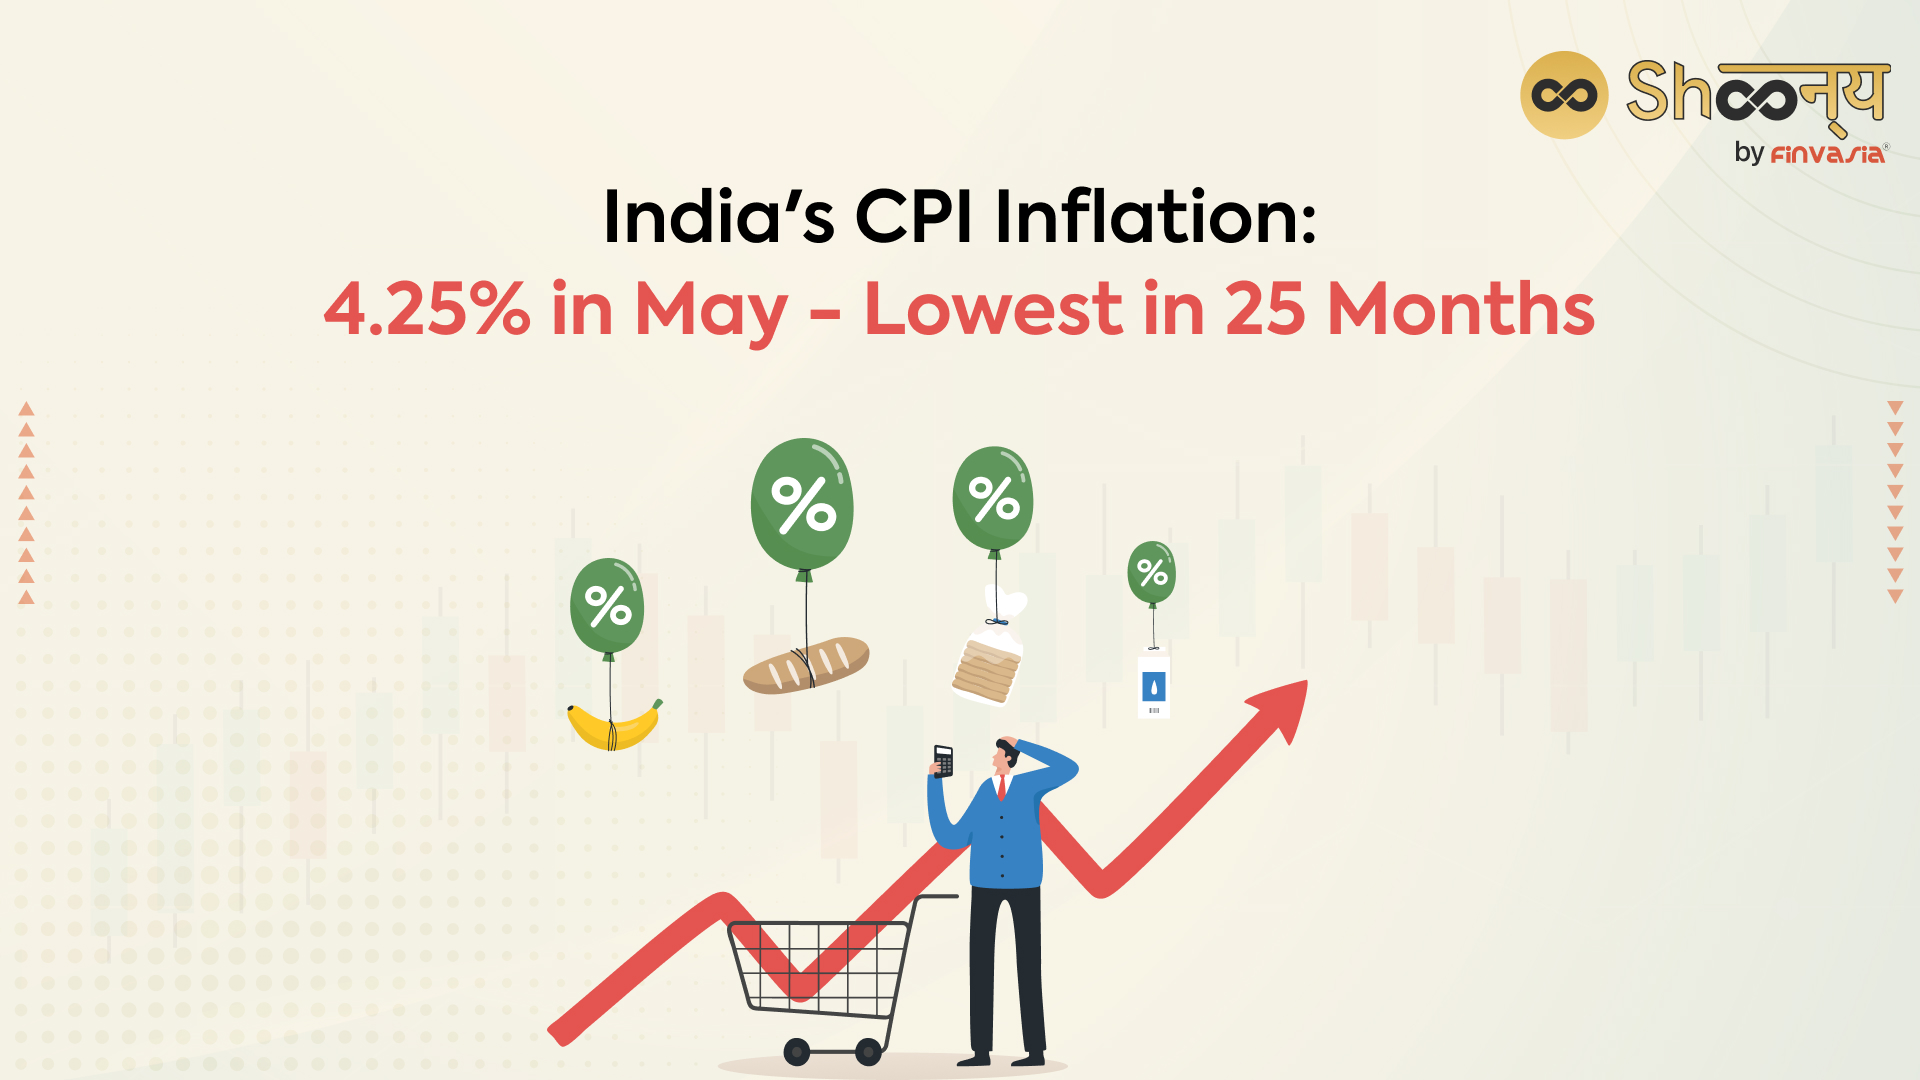 India's CPI Inflation: 4.25% in May - Lowest in 25 Months